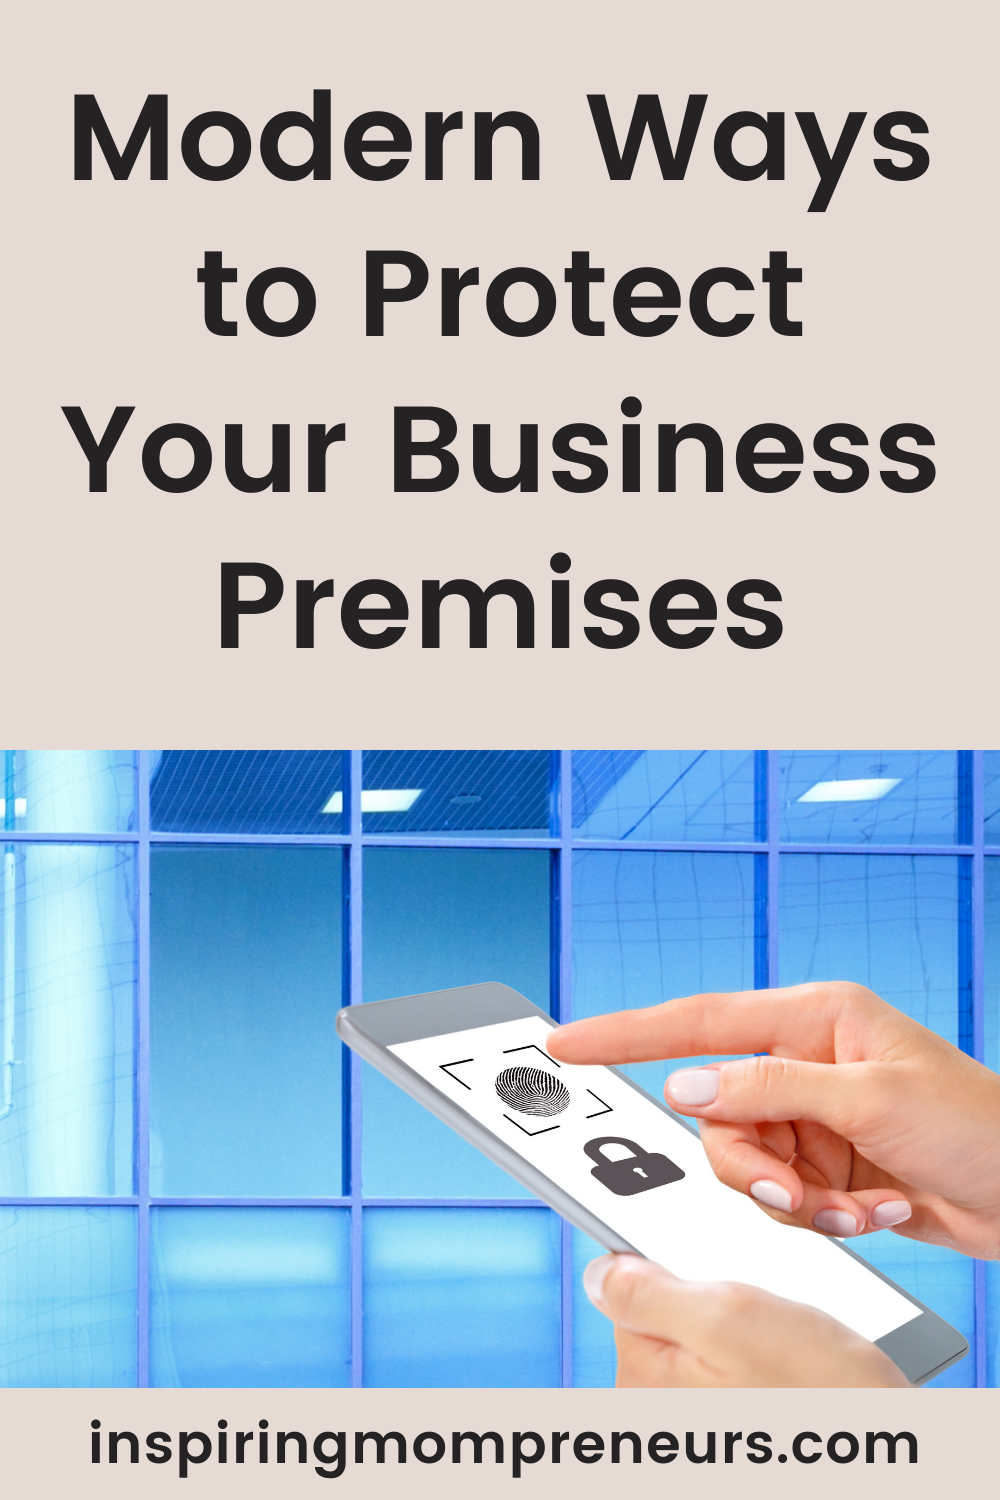 With the rise in security concerns and threats to businesses, you must take all necessary steps to protect your business premises. Here are some modern ways.